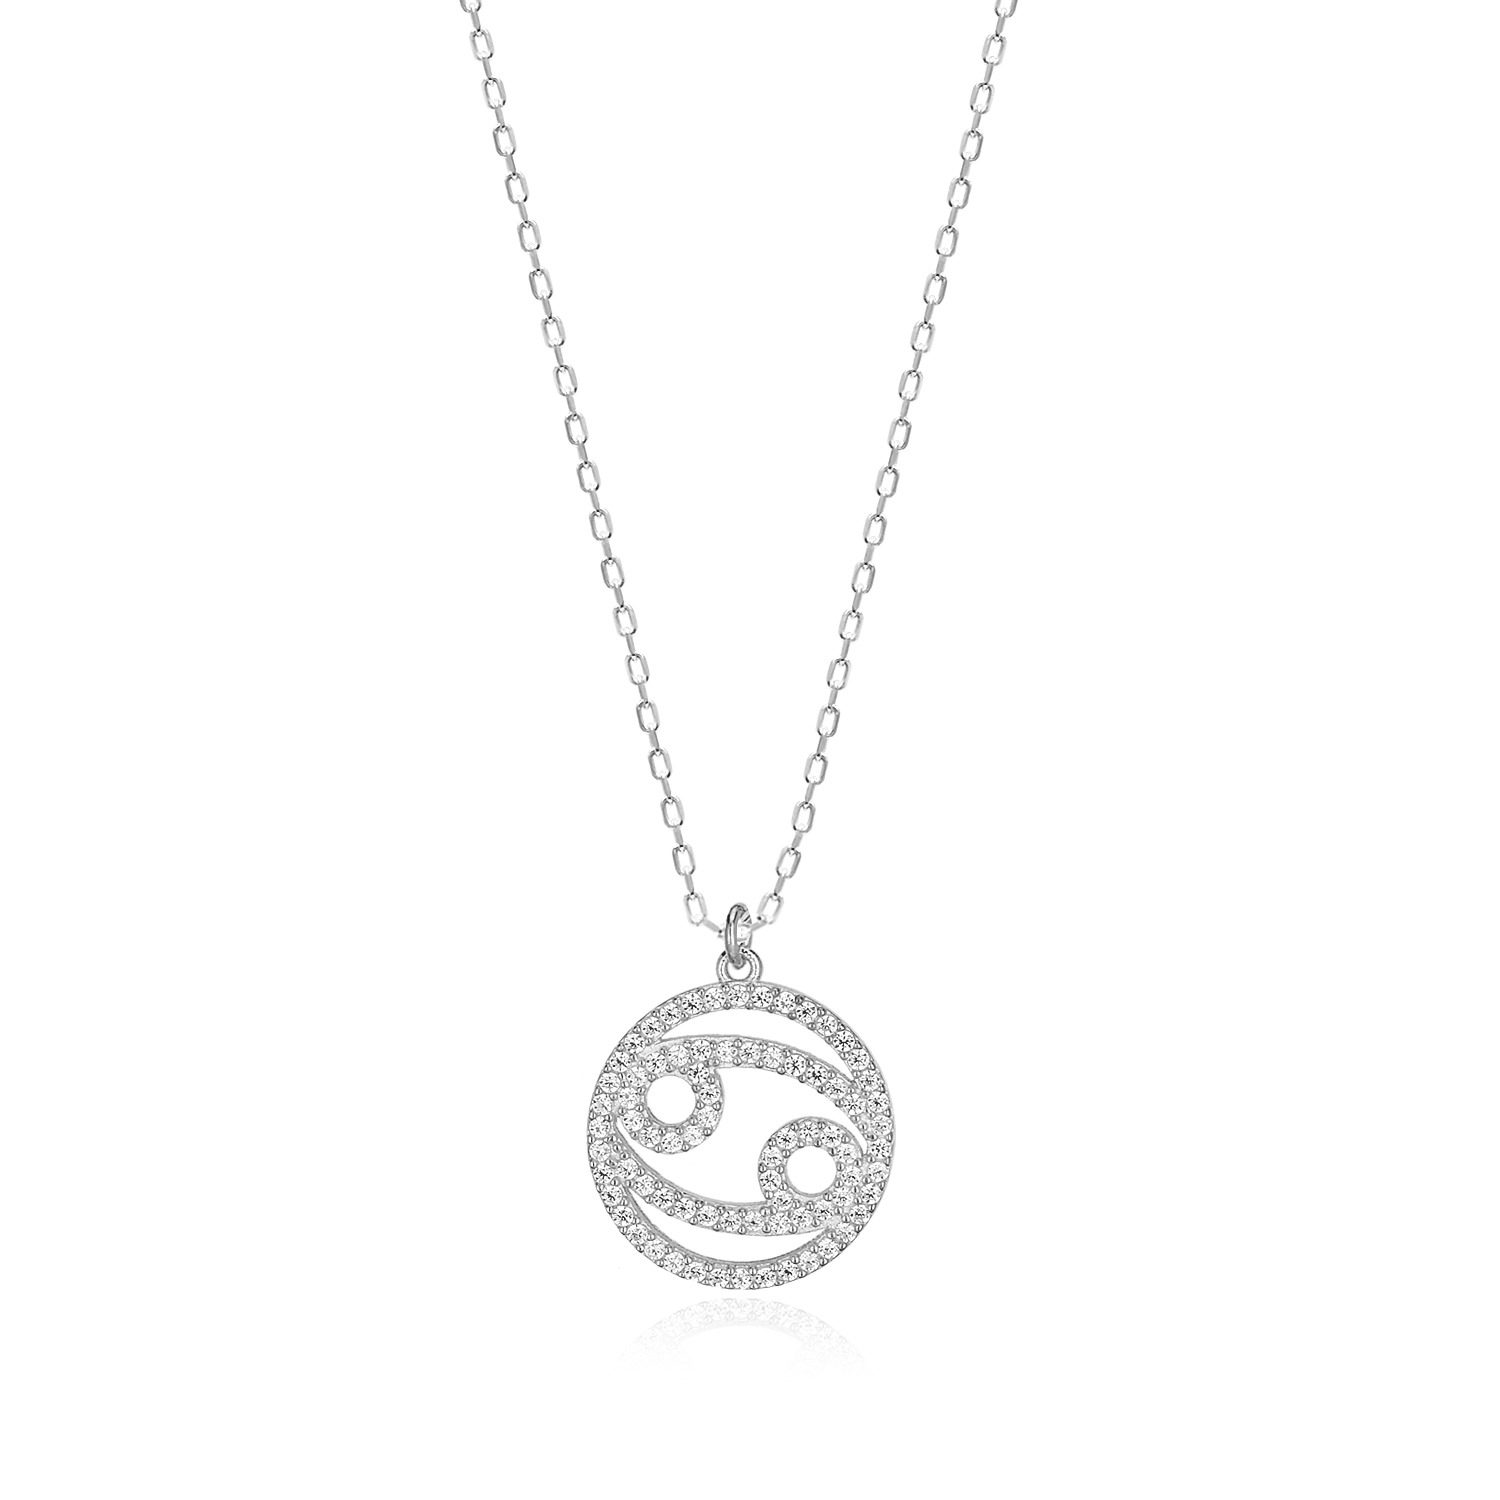 Best Jewelry for the Zodiac Sign of Cancer |